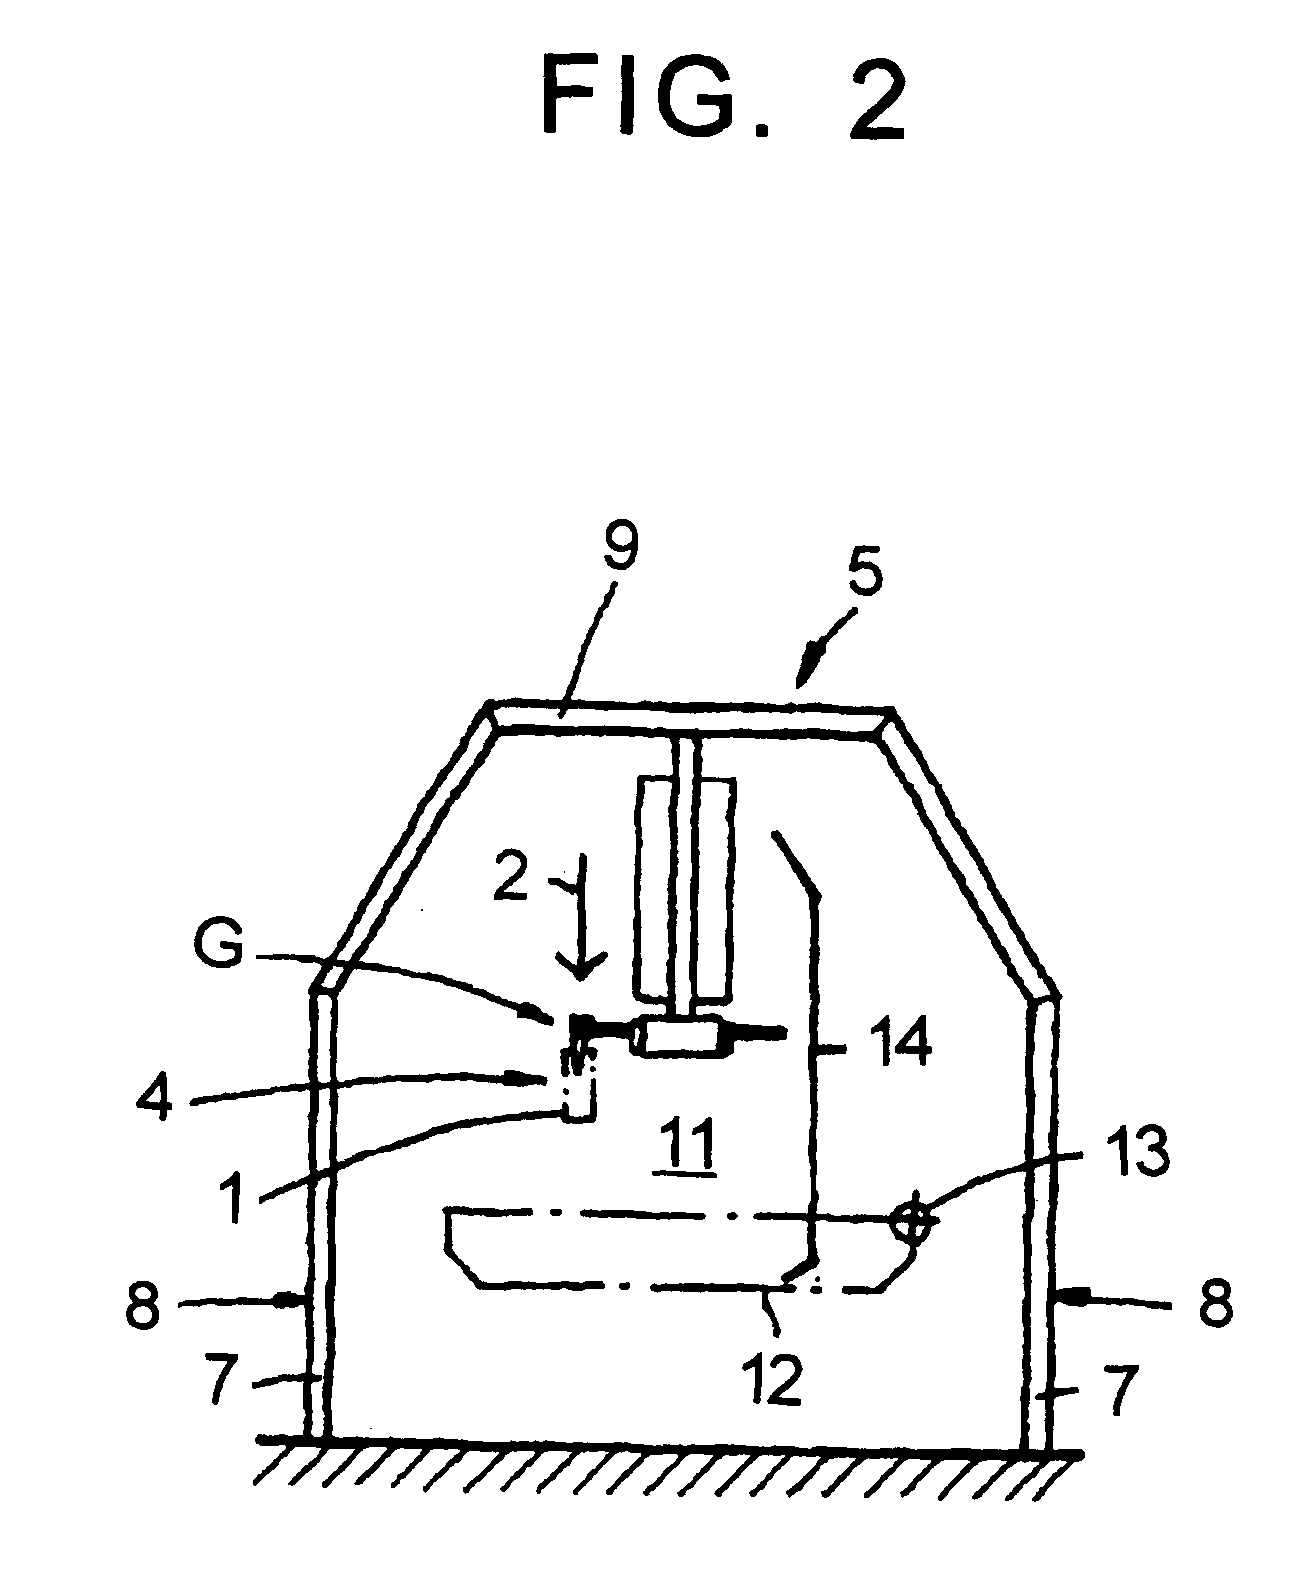 Apparatus for the filling of bags having at least one opening therein and having space to permit decreased accumulation of filling materials